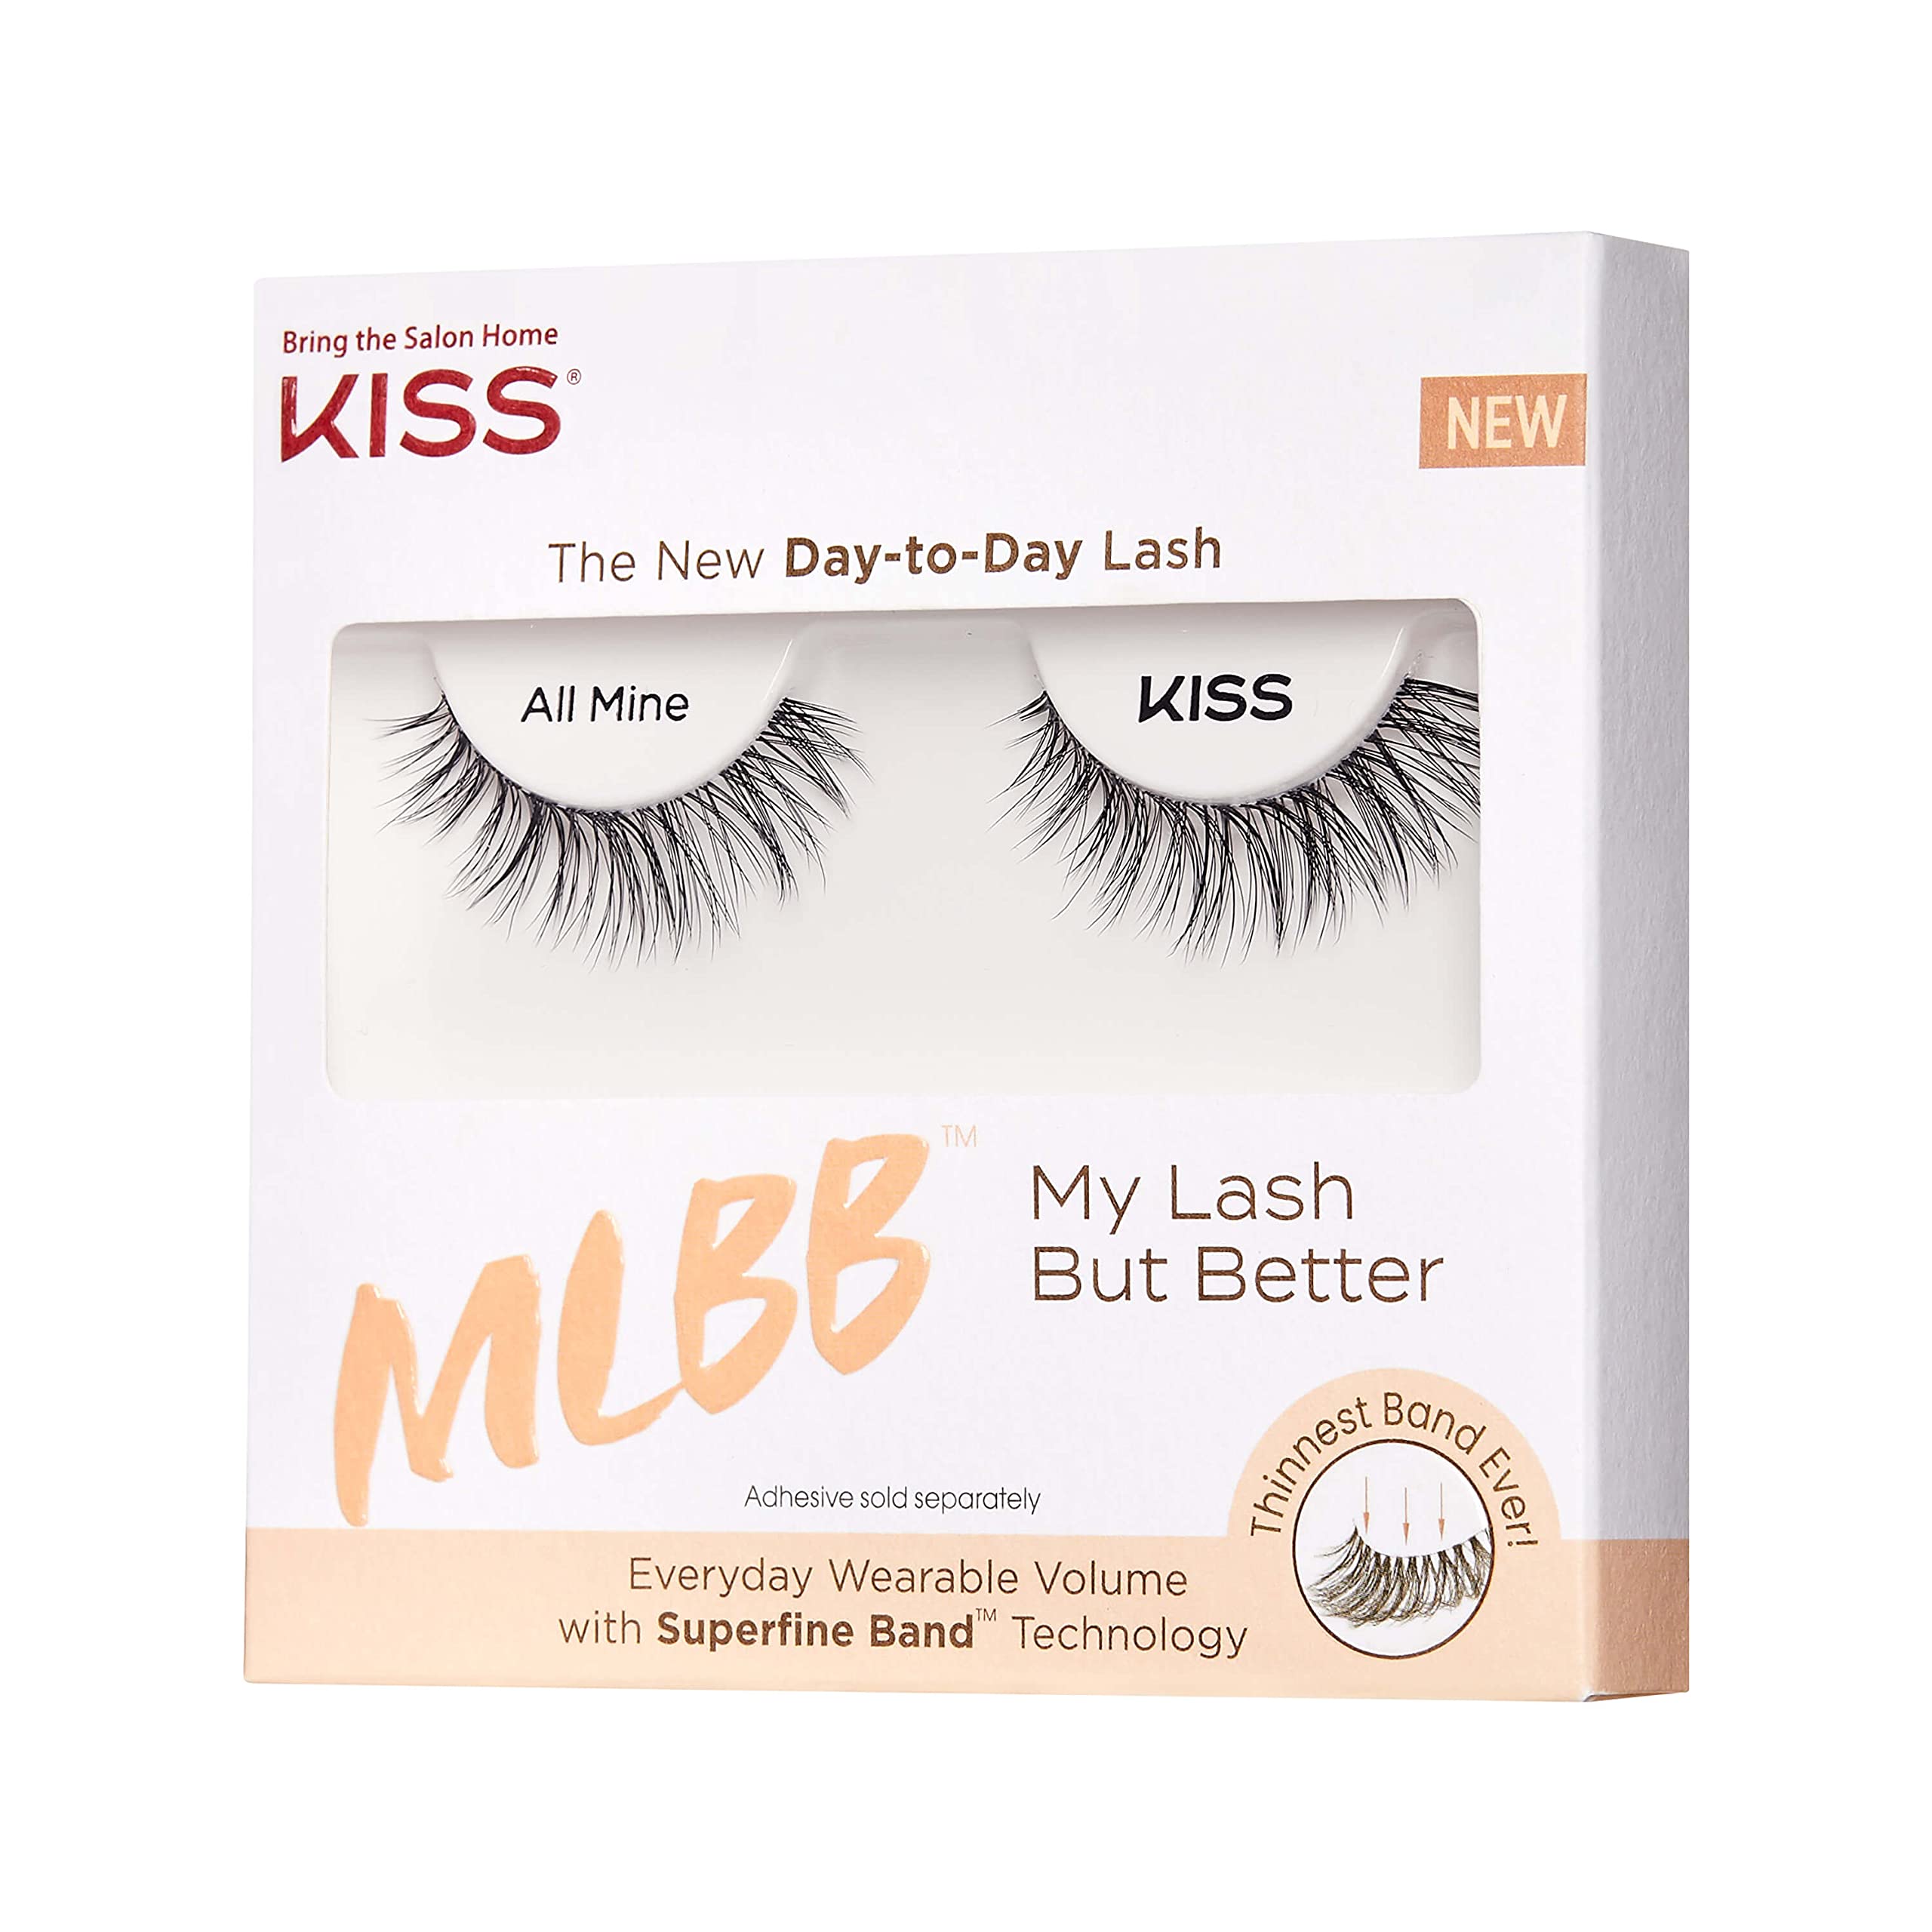 KISS MLBB My Lash But Better False Eyelashes, Everyday Wearable Volume with Superfine Band Technology, Easy To Apply, Reusable, Cruelty-Free, Contact Lens Friendly, Style 'All Mine', 1 Pair Fake Eyelashes